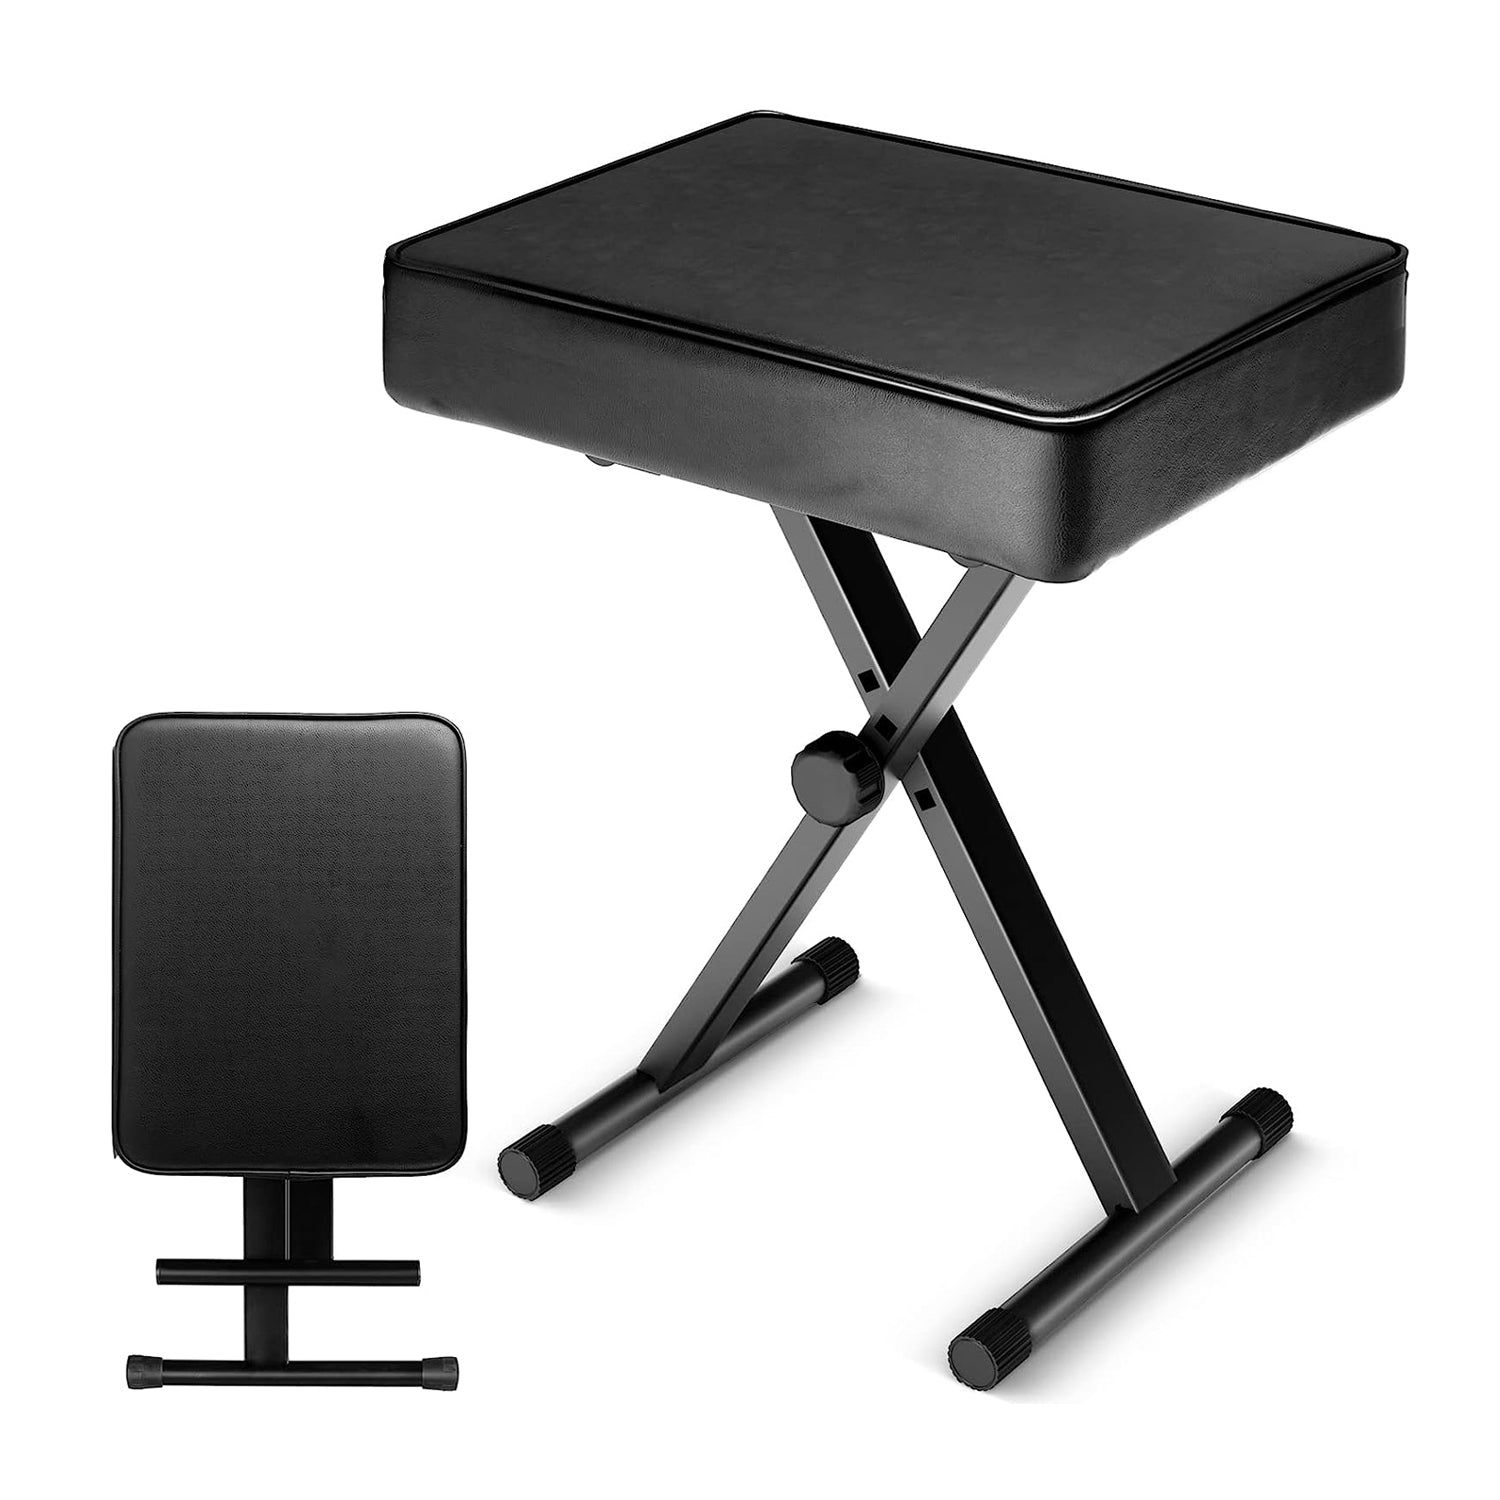 Adjustable keyboard stand with padded piano stool for comfortable music play.